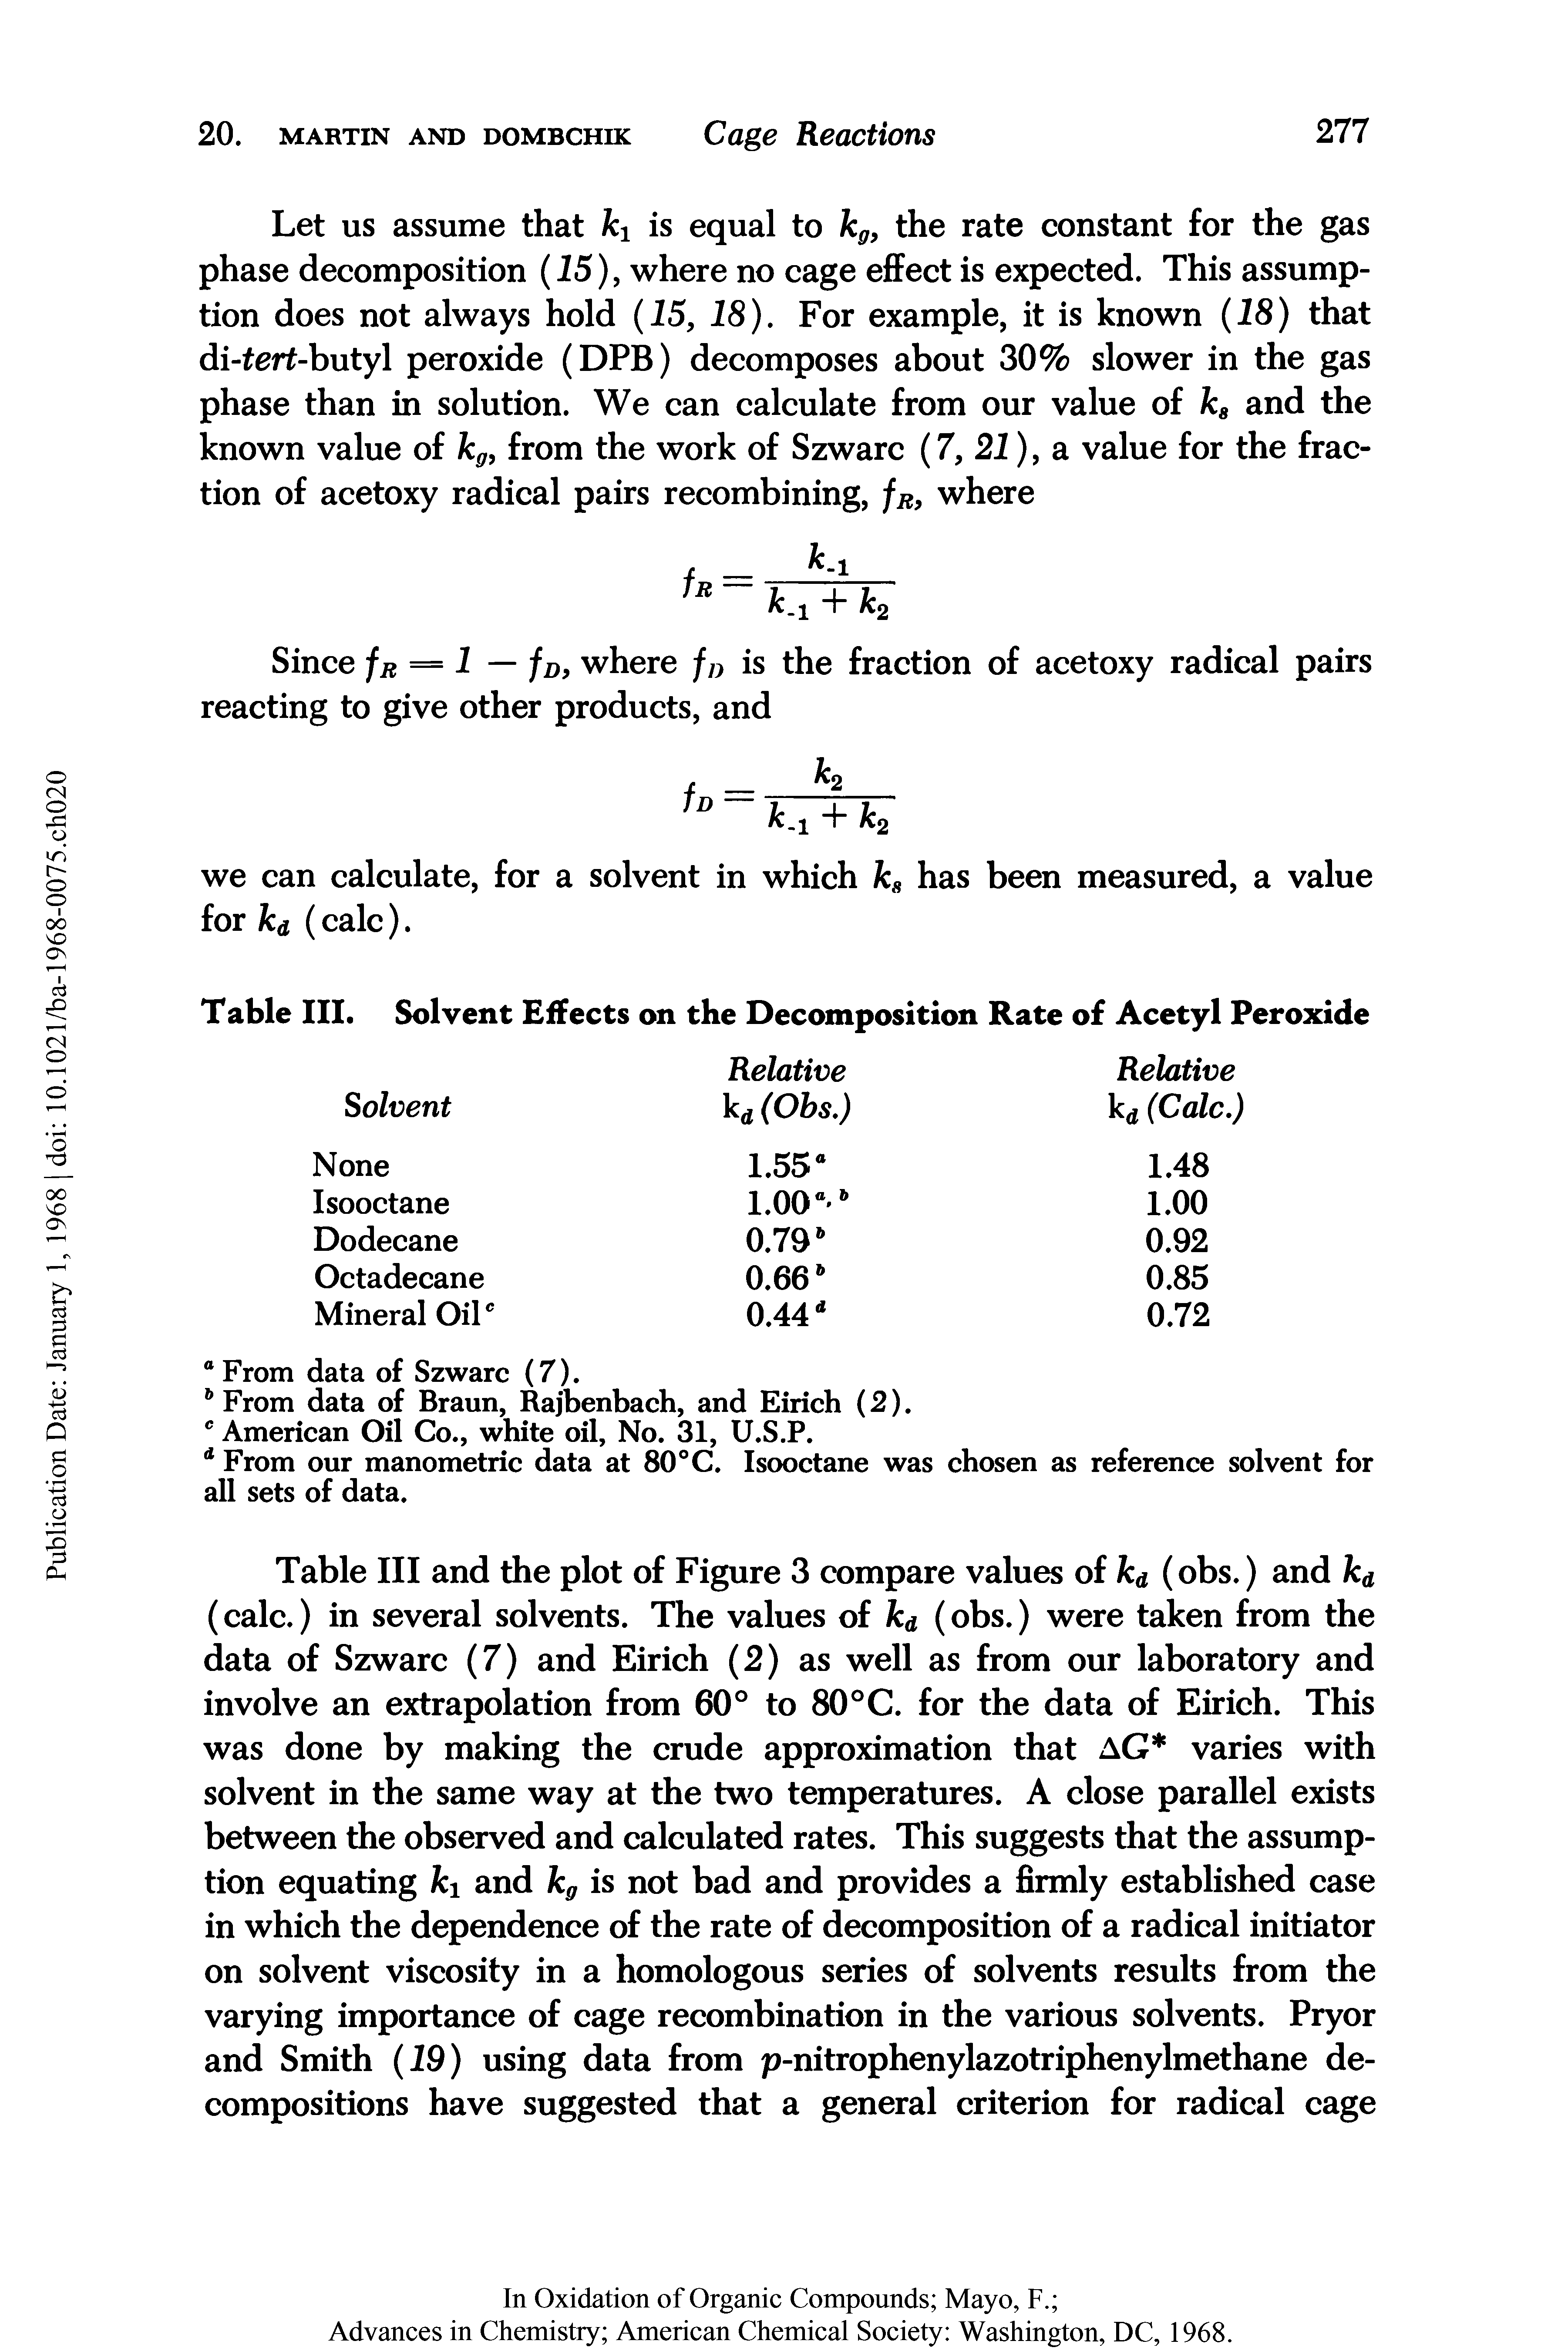 Table III and the plot of Figure 3 compare values of kd (obs.) and kd (calc.) in several solvents. The values of kd (obs.) were taken from the data of Szwarc (7) and Eirich (2) as well as from our laboratory and involve an extrapolation from 60° to 80°C. for the data of Eirich. This was done by making the crude approximation that AG varies with solvent in the same way at the two temperatures. A close parallel exists between the observed and calculated rates. This suggests that the assumption equating ki and kg is not bad and provides a firmly established case in which the dependence of the rate of decomposition of a radical initiator on solvent viscosity in a homologous series of solvents results from the varying importance of cage recombination in the various solvents. Pryor and Smith (19) using data from p-nitrophenylazotriphenylmethane decompositions have suggested that a general criterion for radical cage...